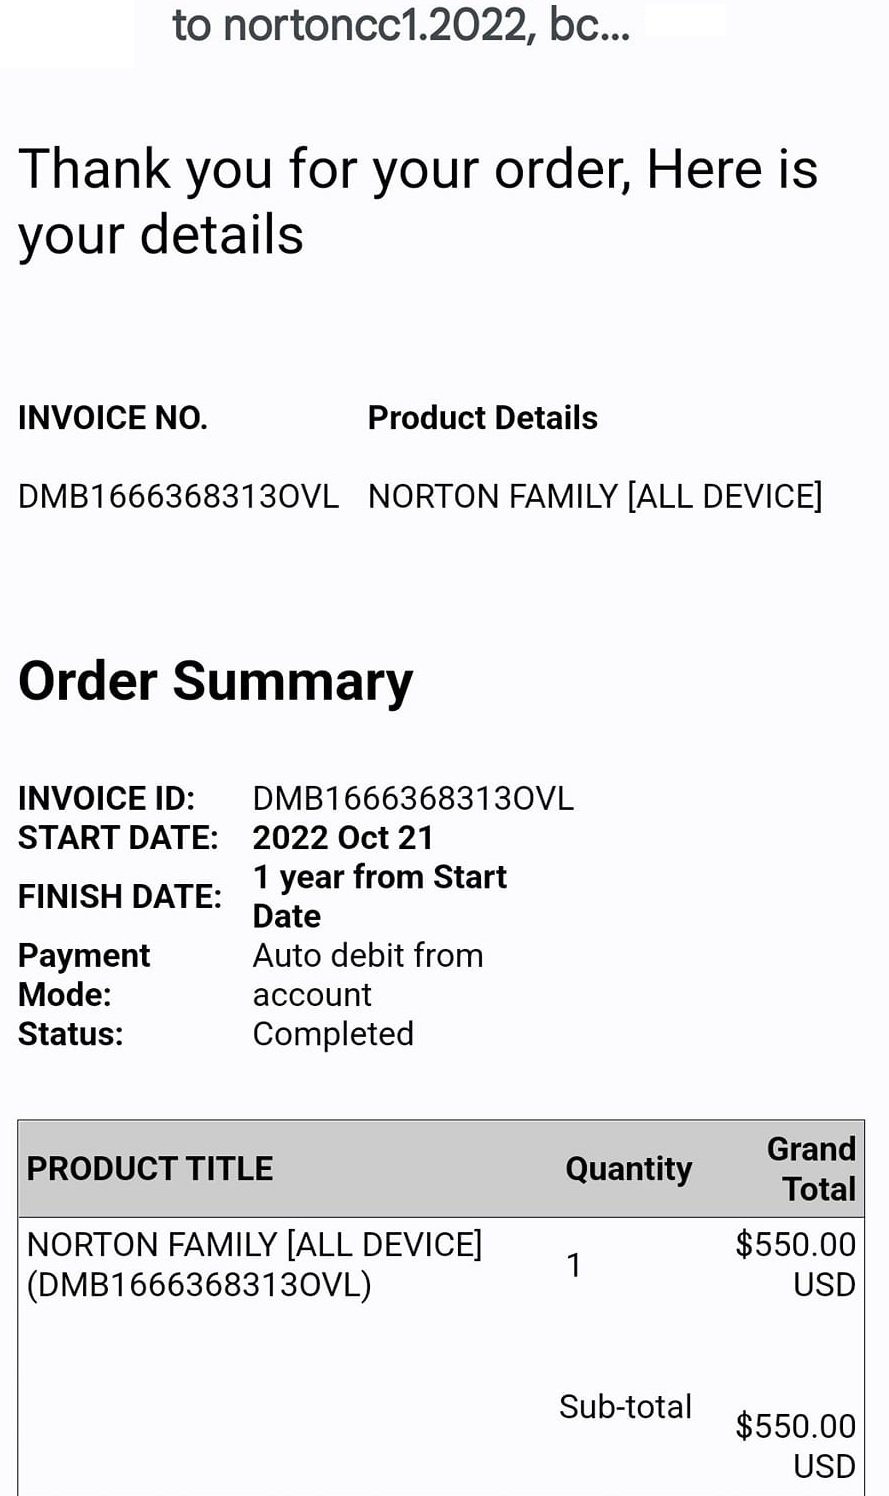 The Norton Family All Device Scam Email Invoice